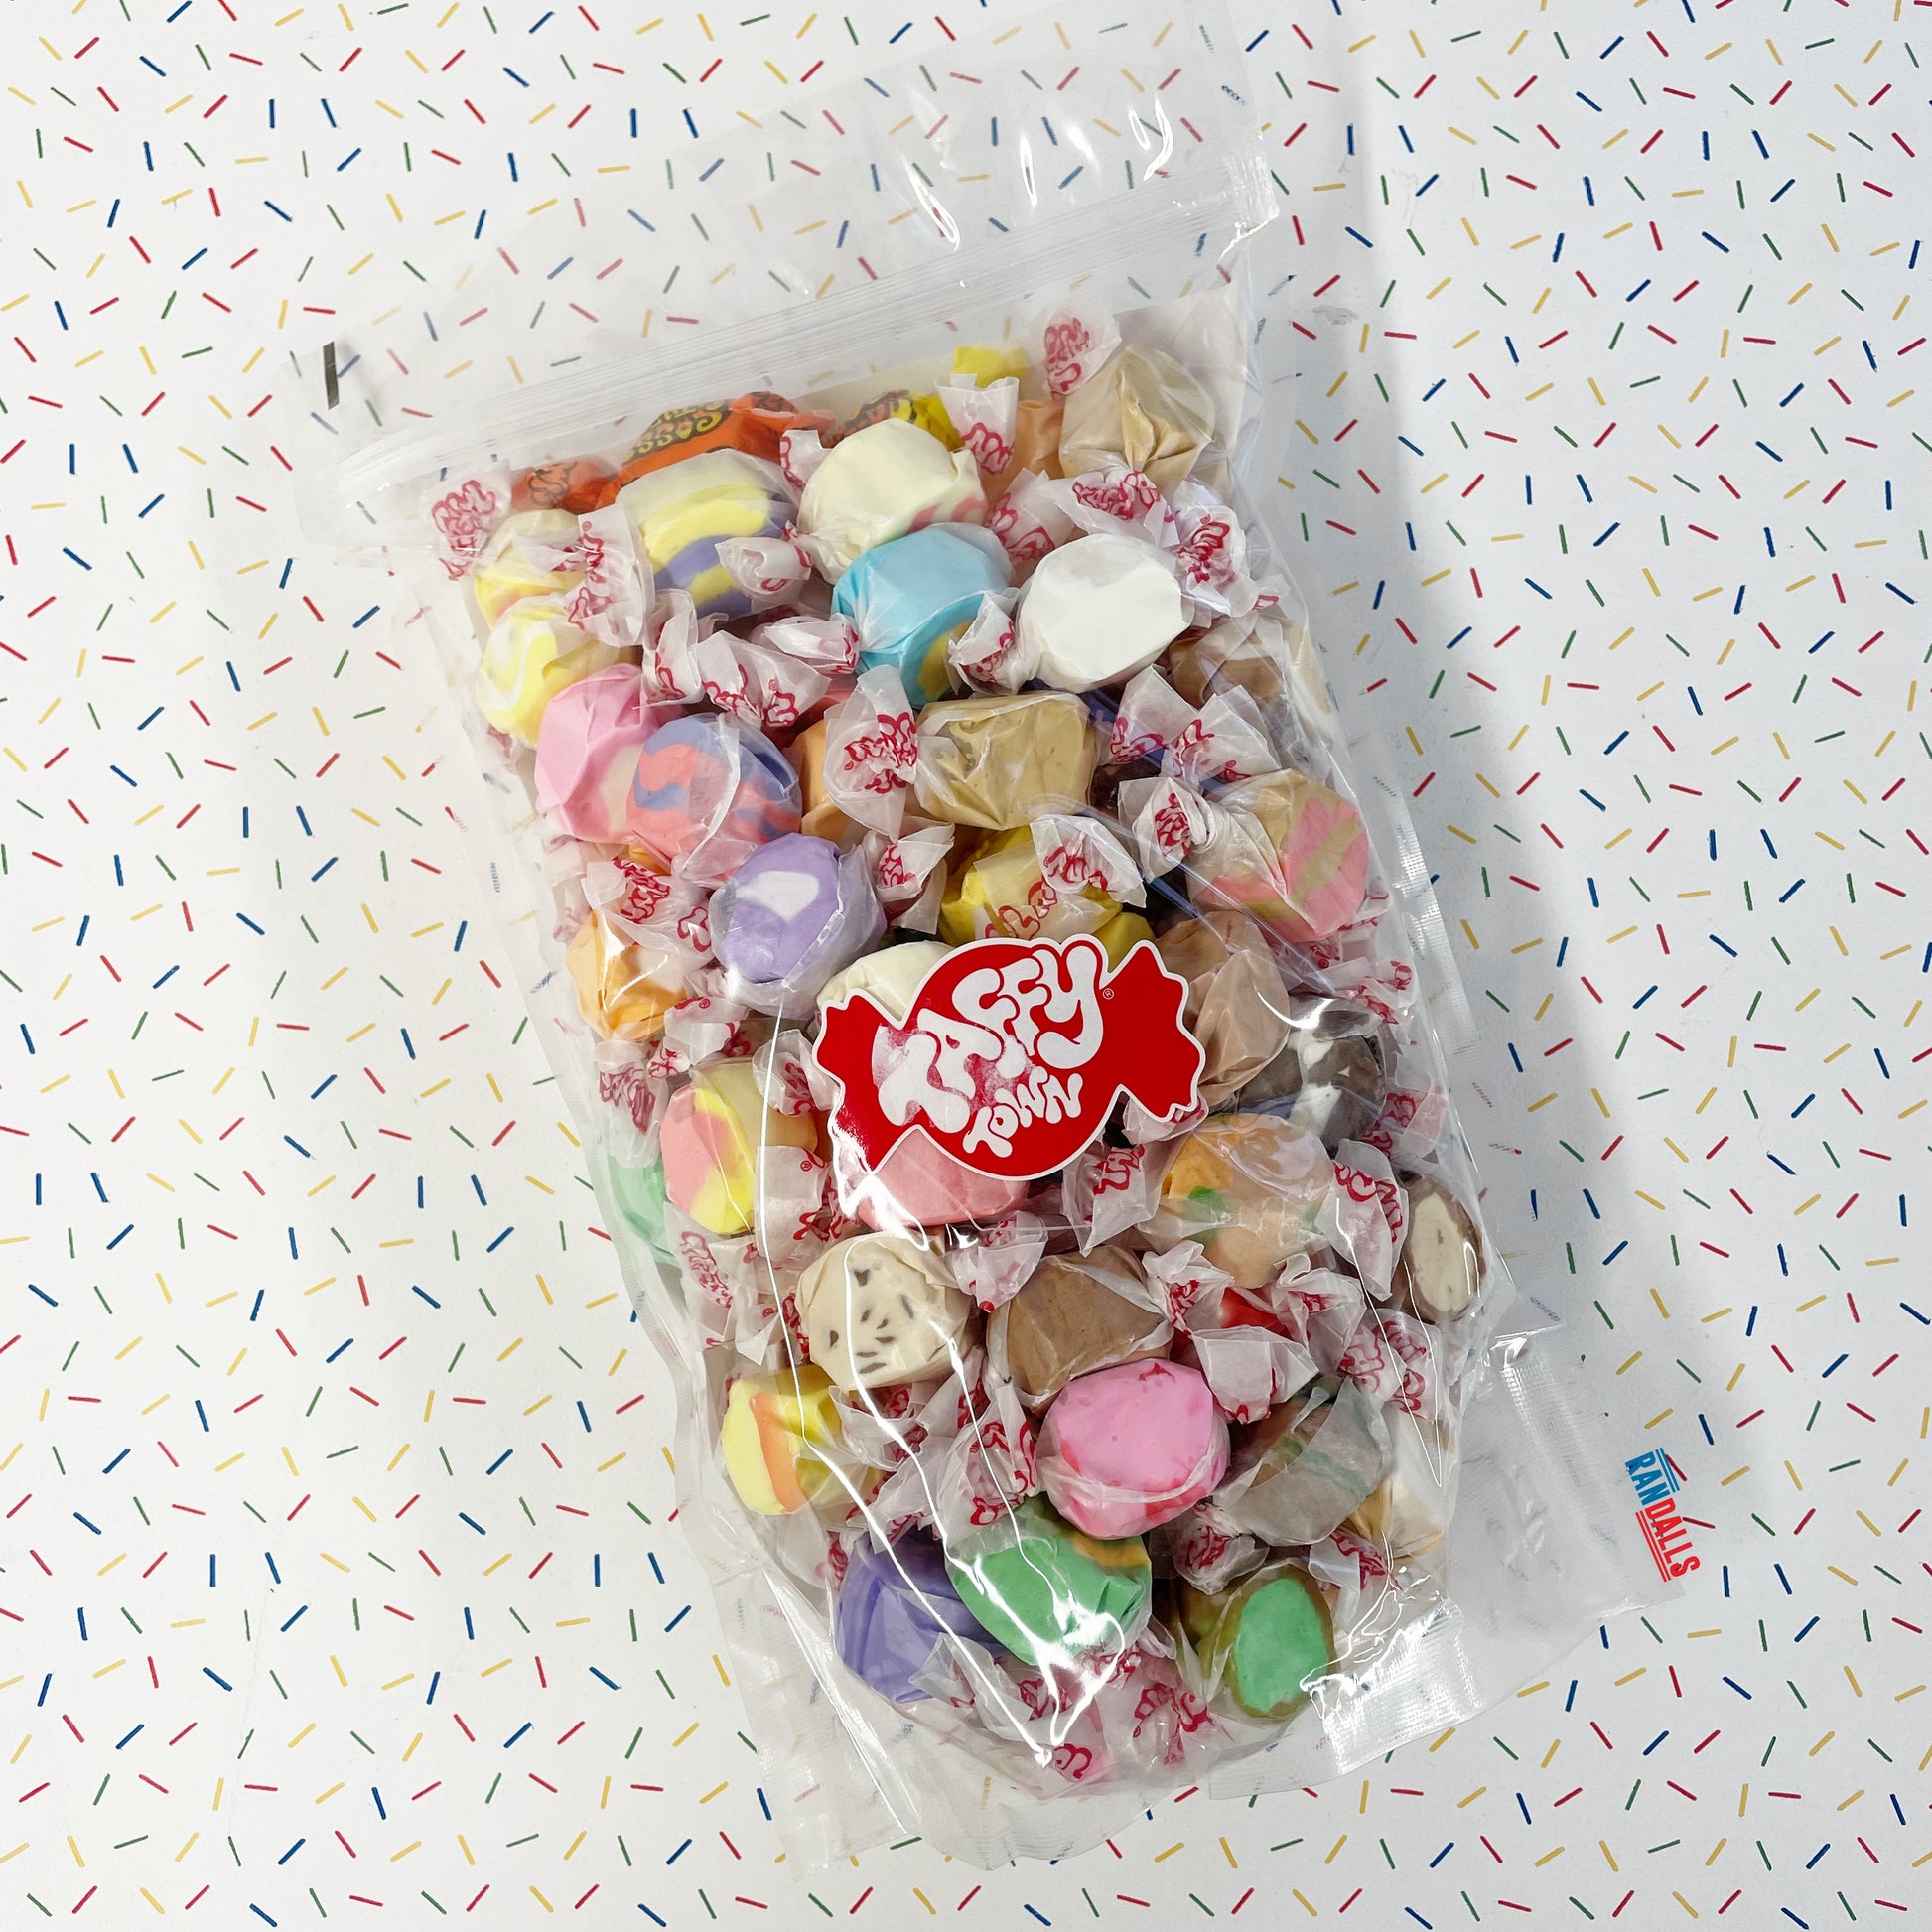 taffy town salt water taffy, chewy, gummy, soft, sweet, candy, randalls, taffy town flavours, chocolate, applie pie caramel apple, lemon, mango, cotton candy, chicken and waffles, bacon, maple, randalls